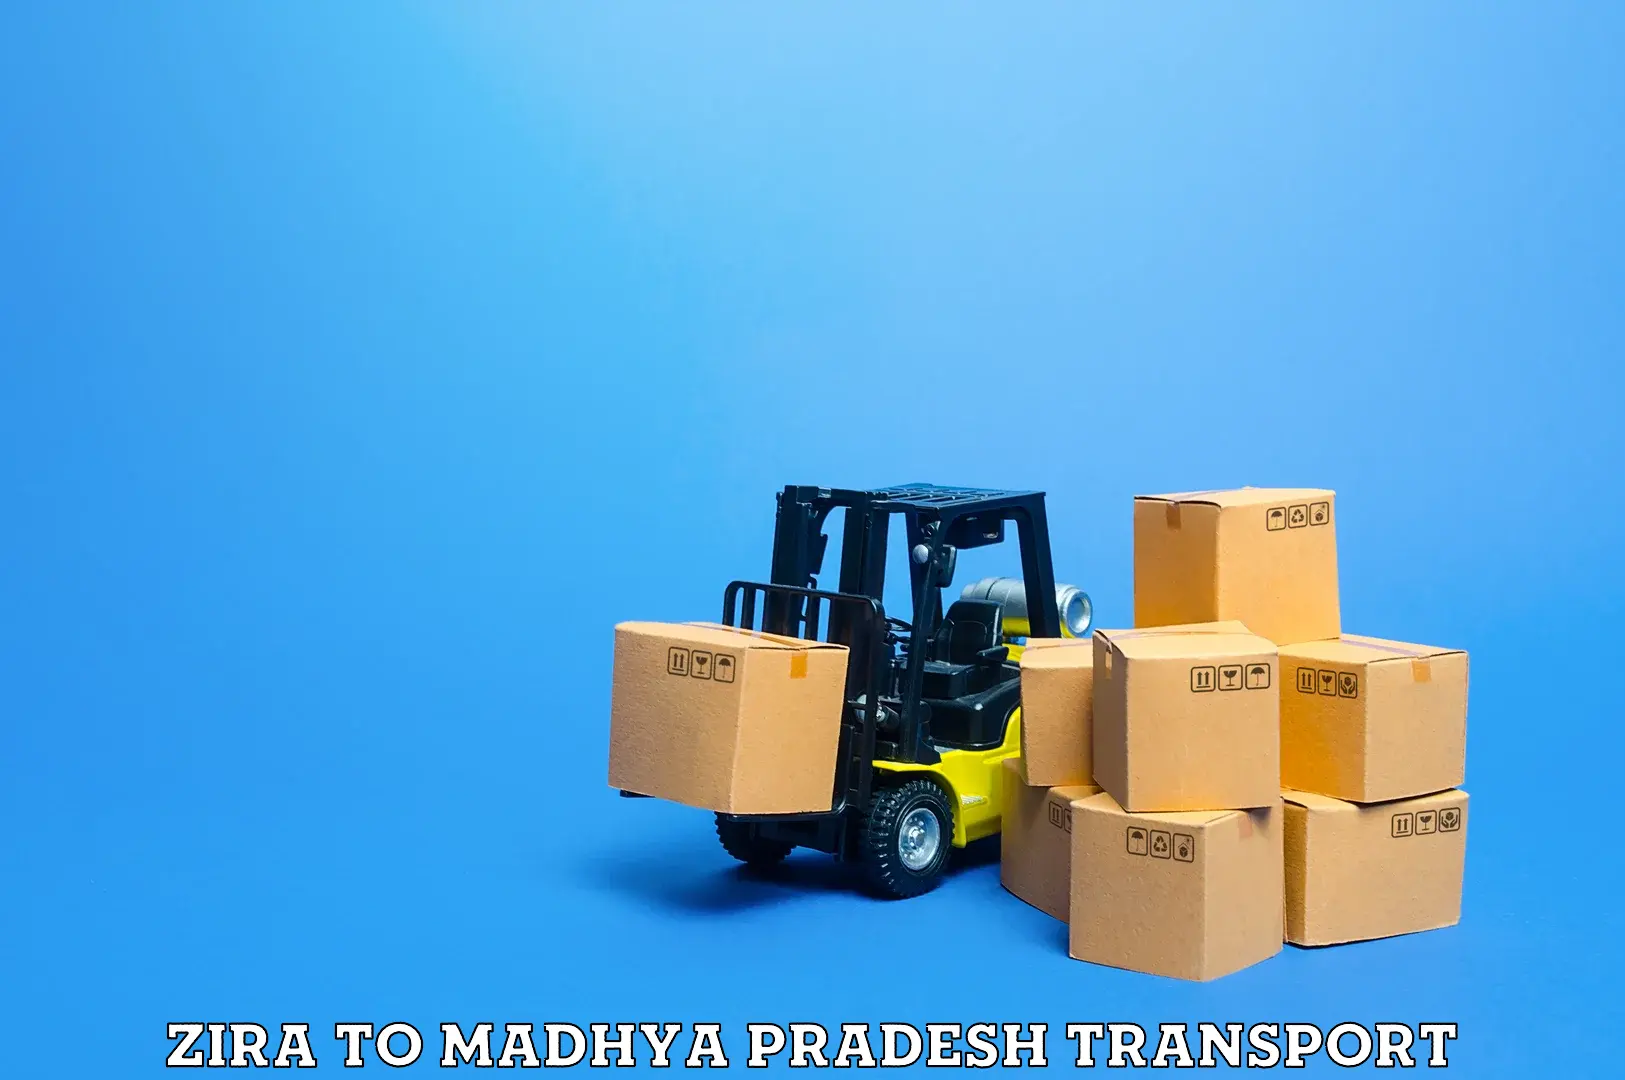 Truck transport companies in India Zira to Pithampur